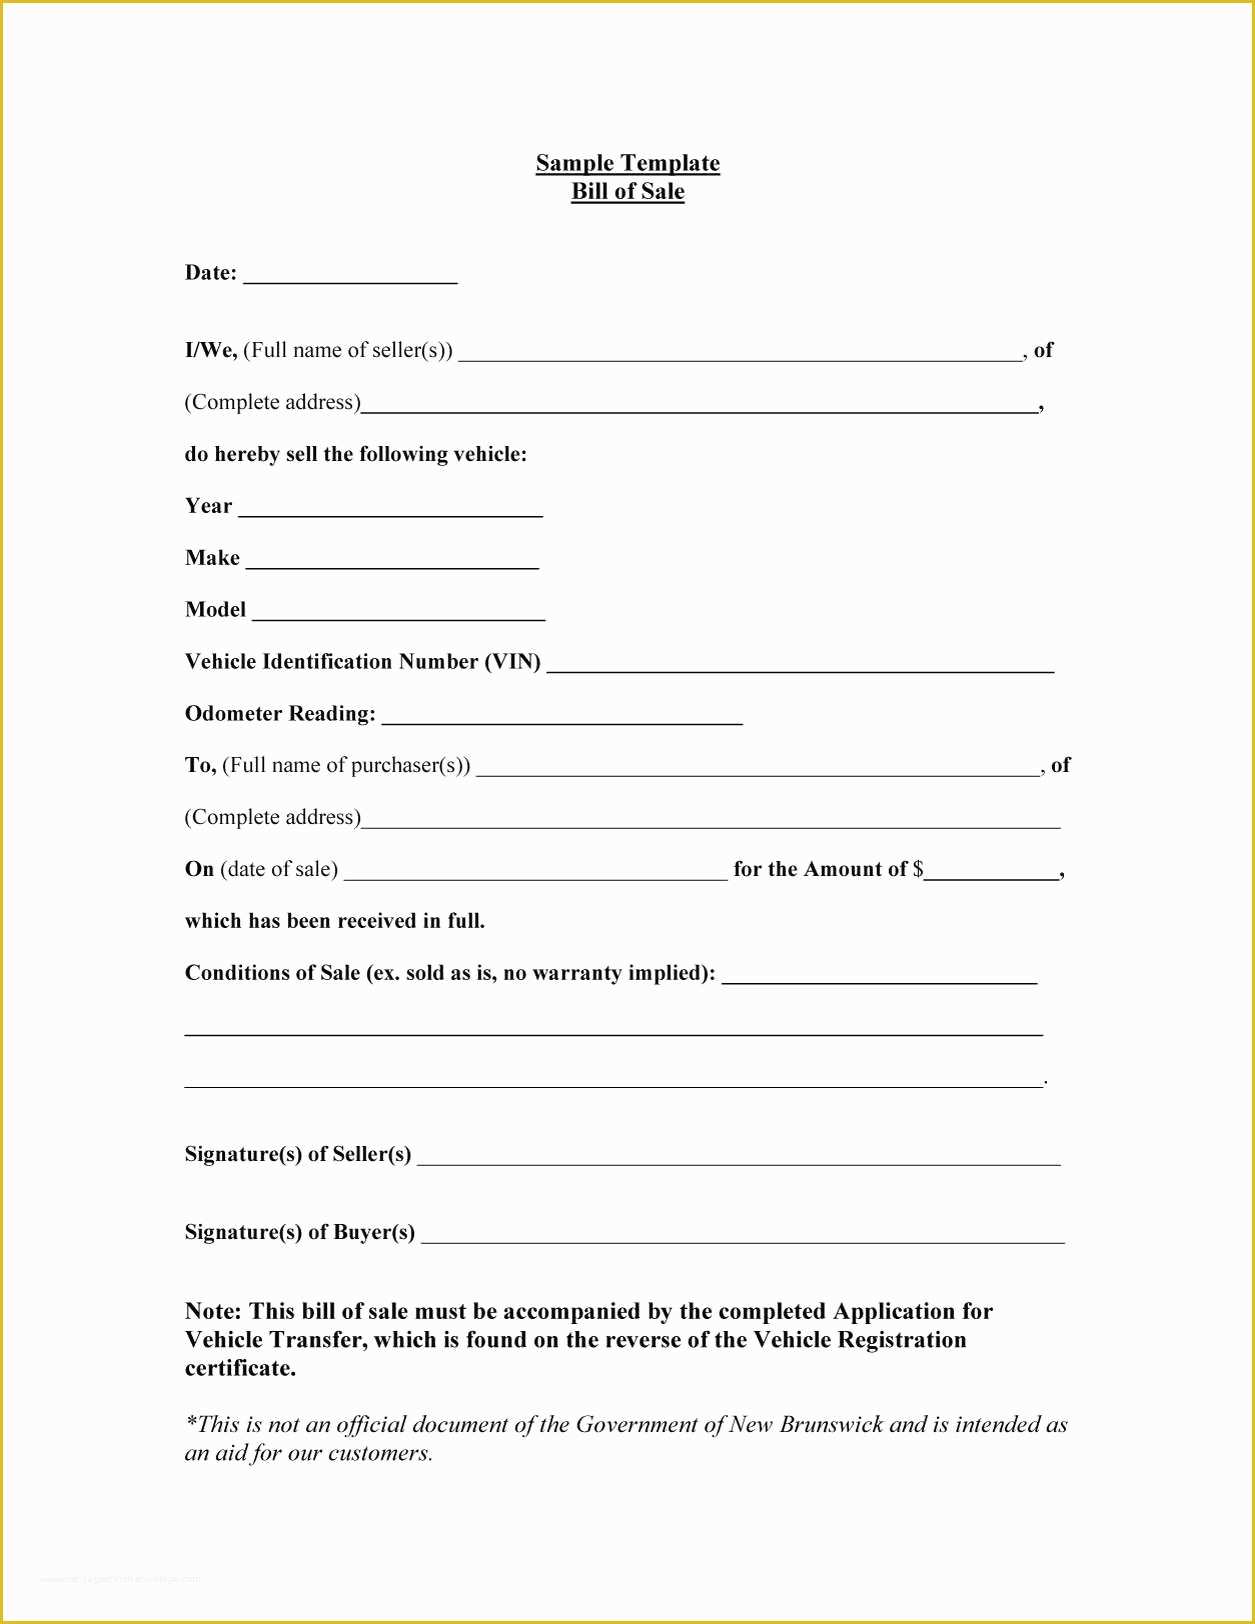 free-vehicle-bill-of-sale-template-of-46-fee-printable-bill-of-sale